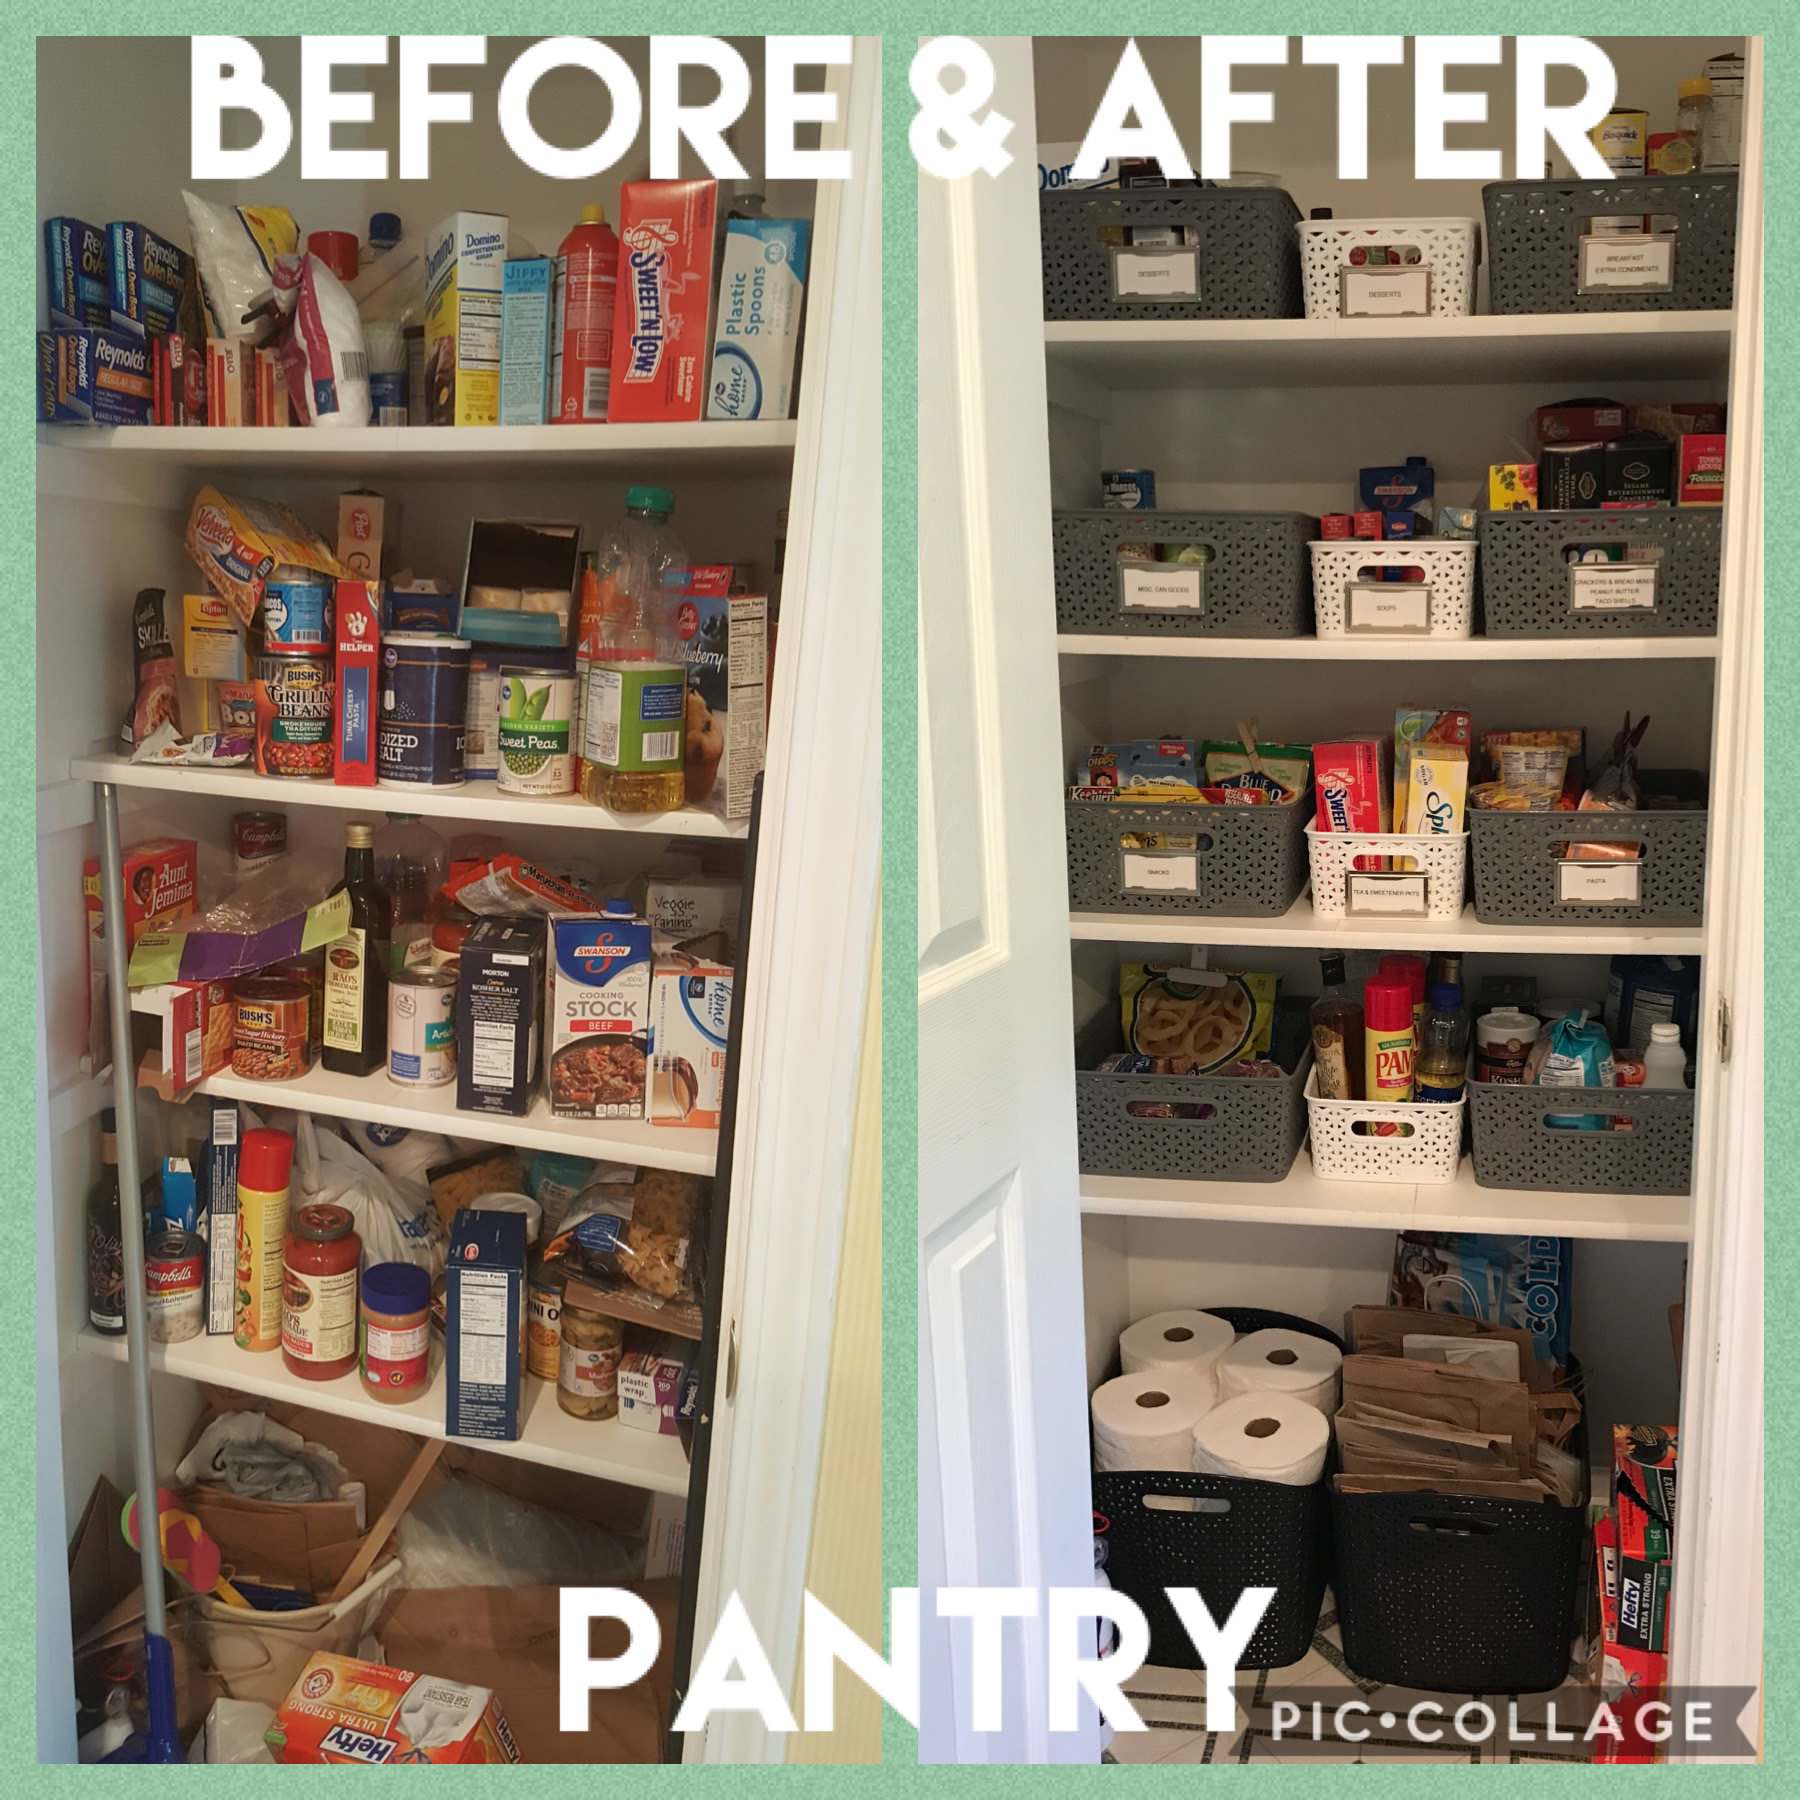 Pantry before and after